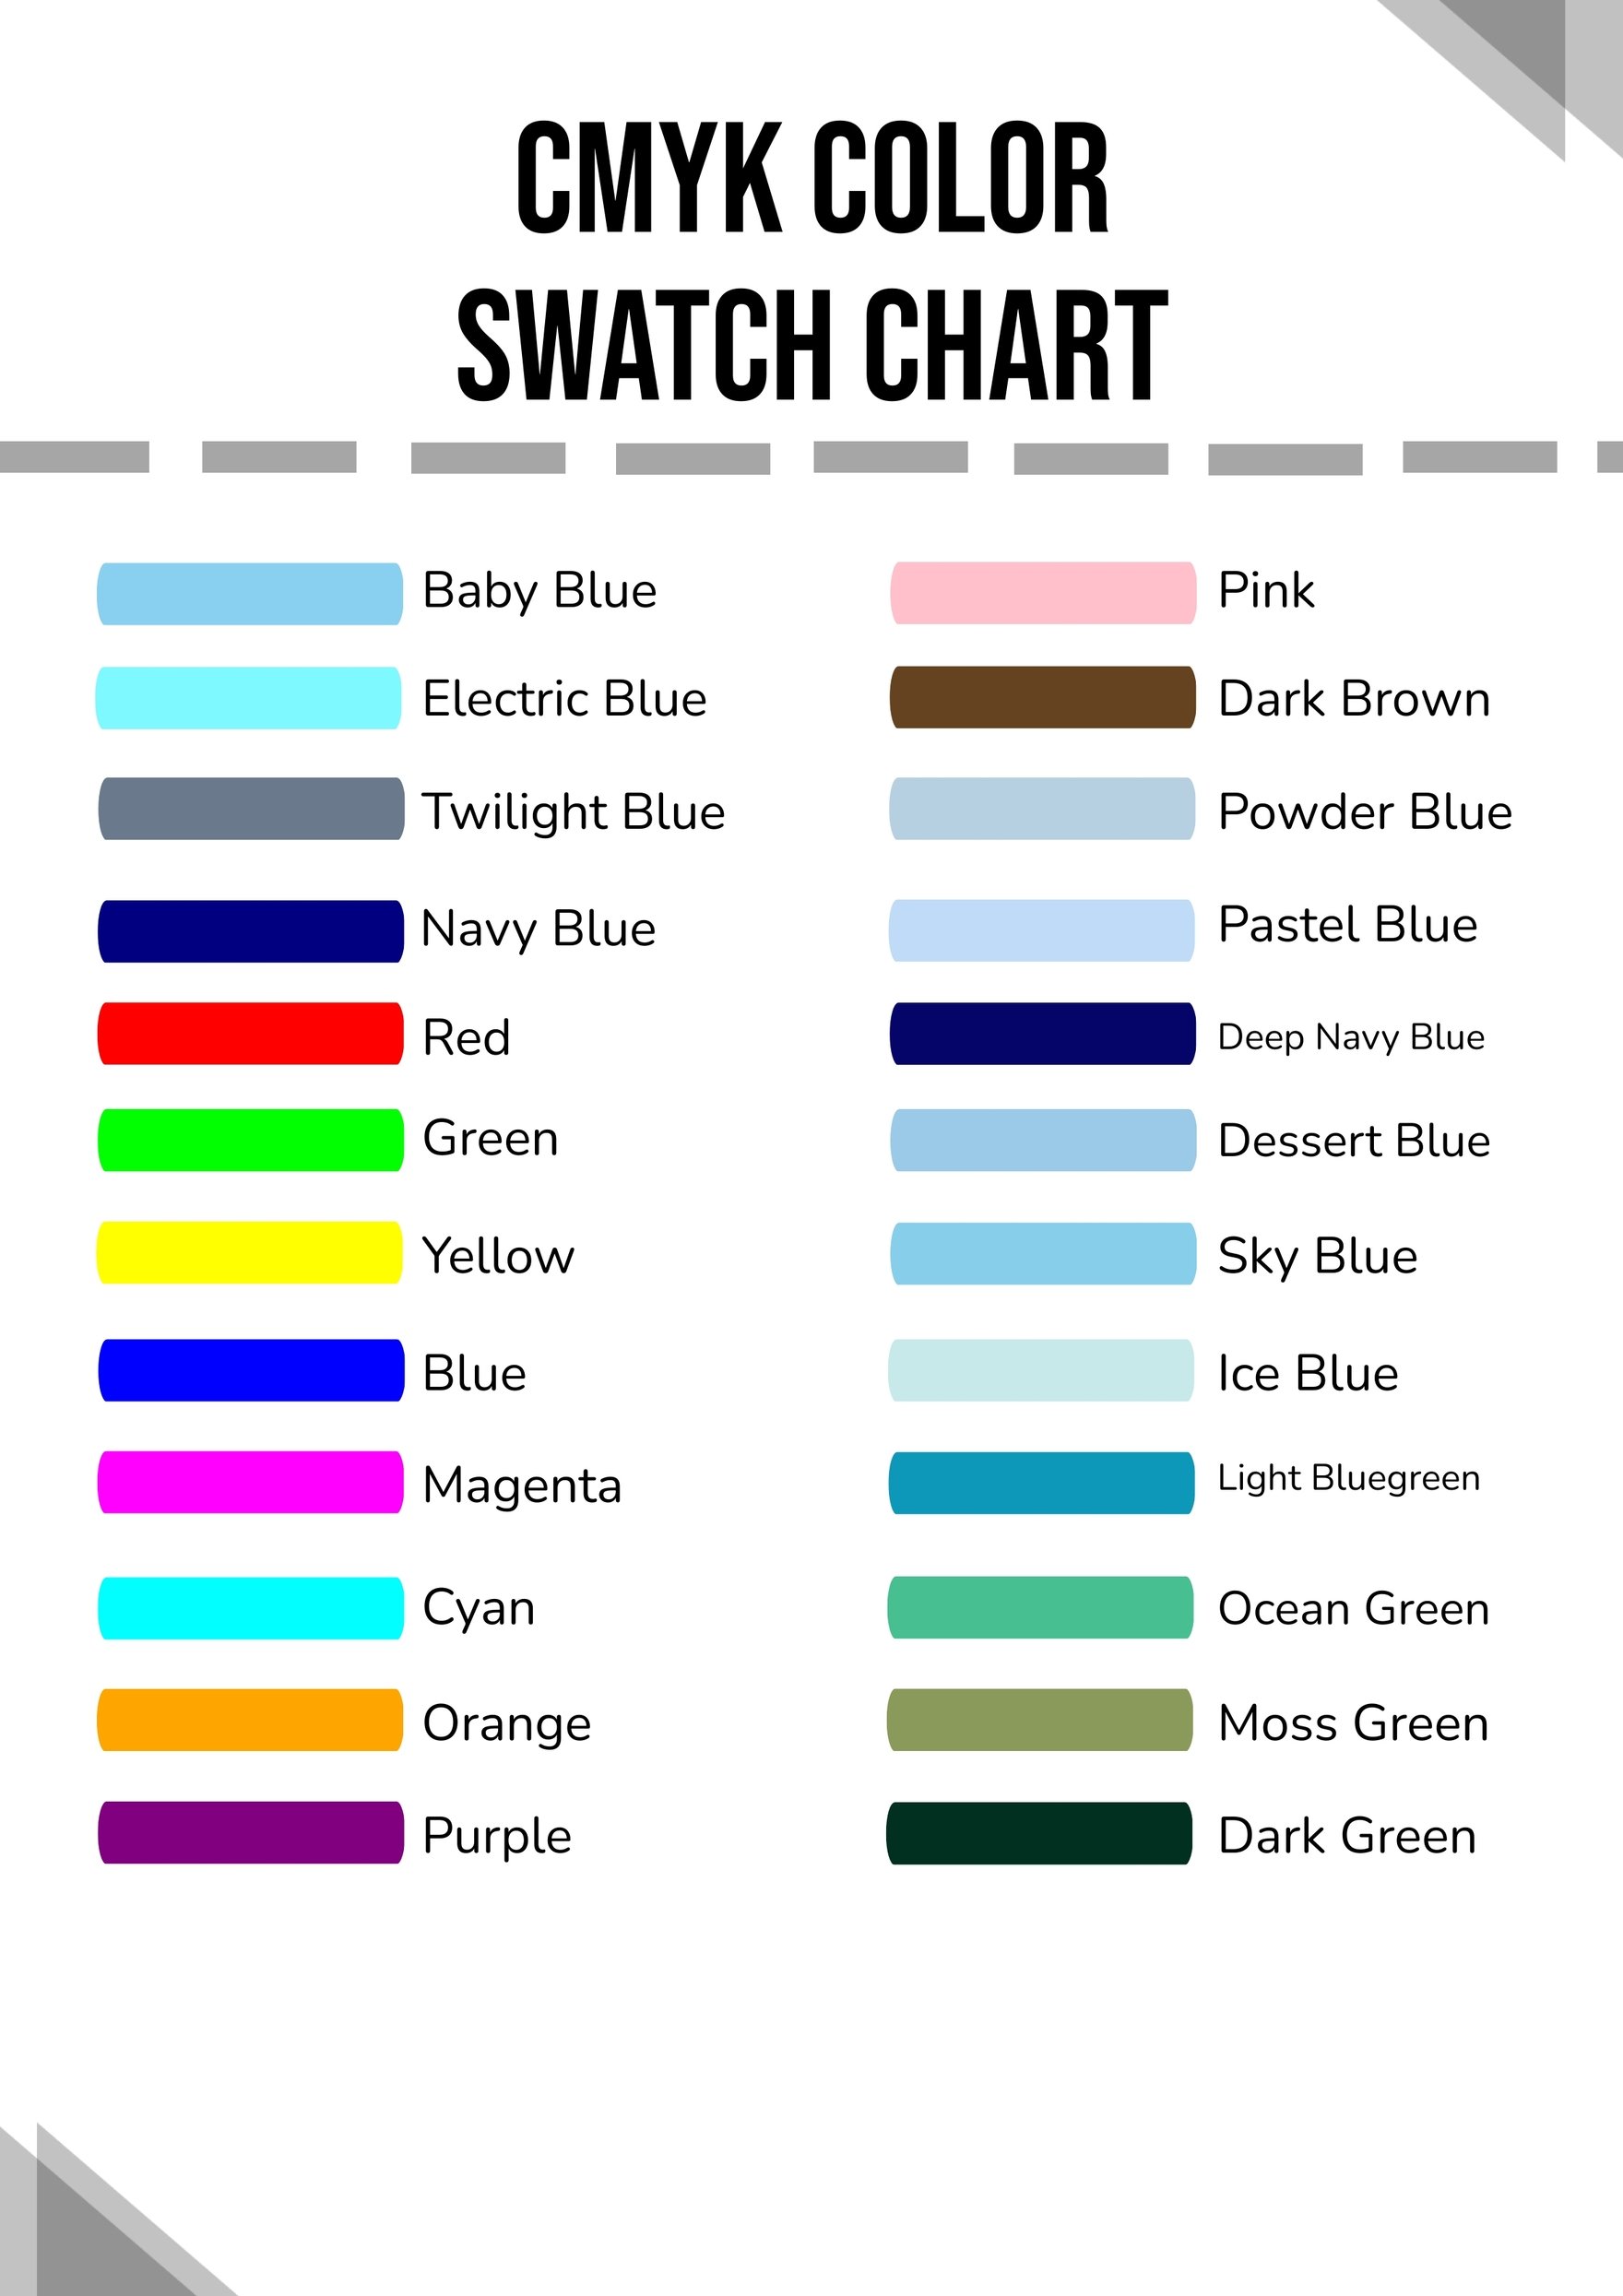 CMYK Color Swatch Chart Template